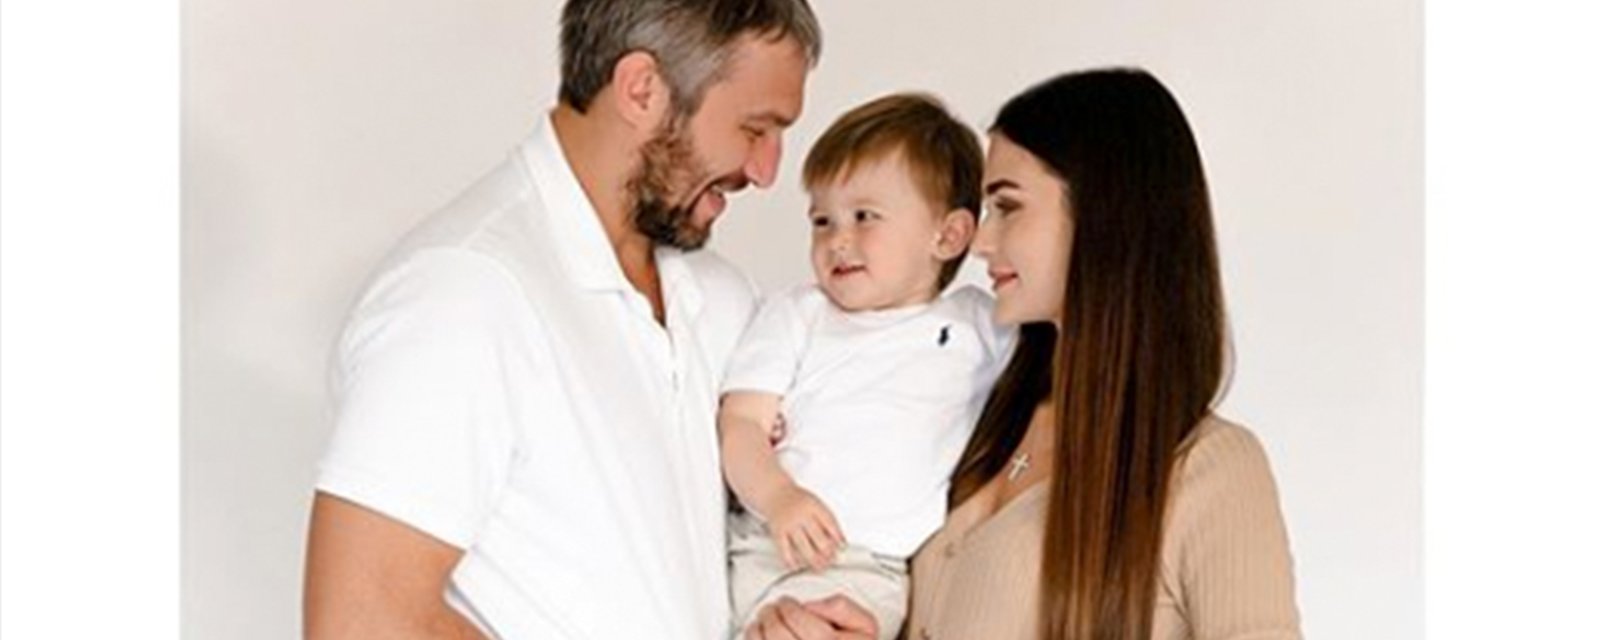 Ovechkin and wife Nastya announce an addition to their young family